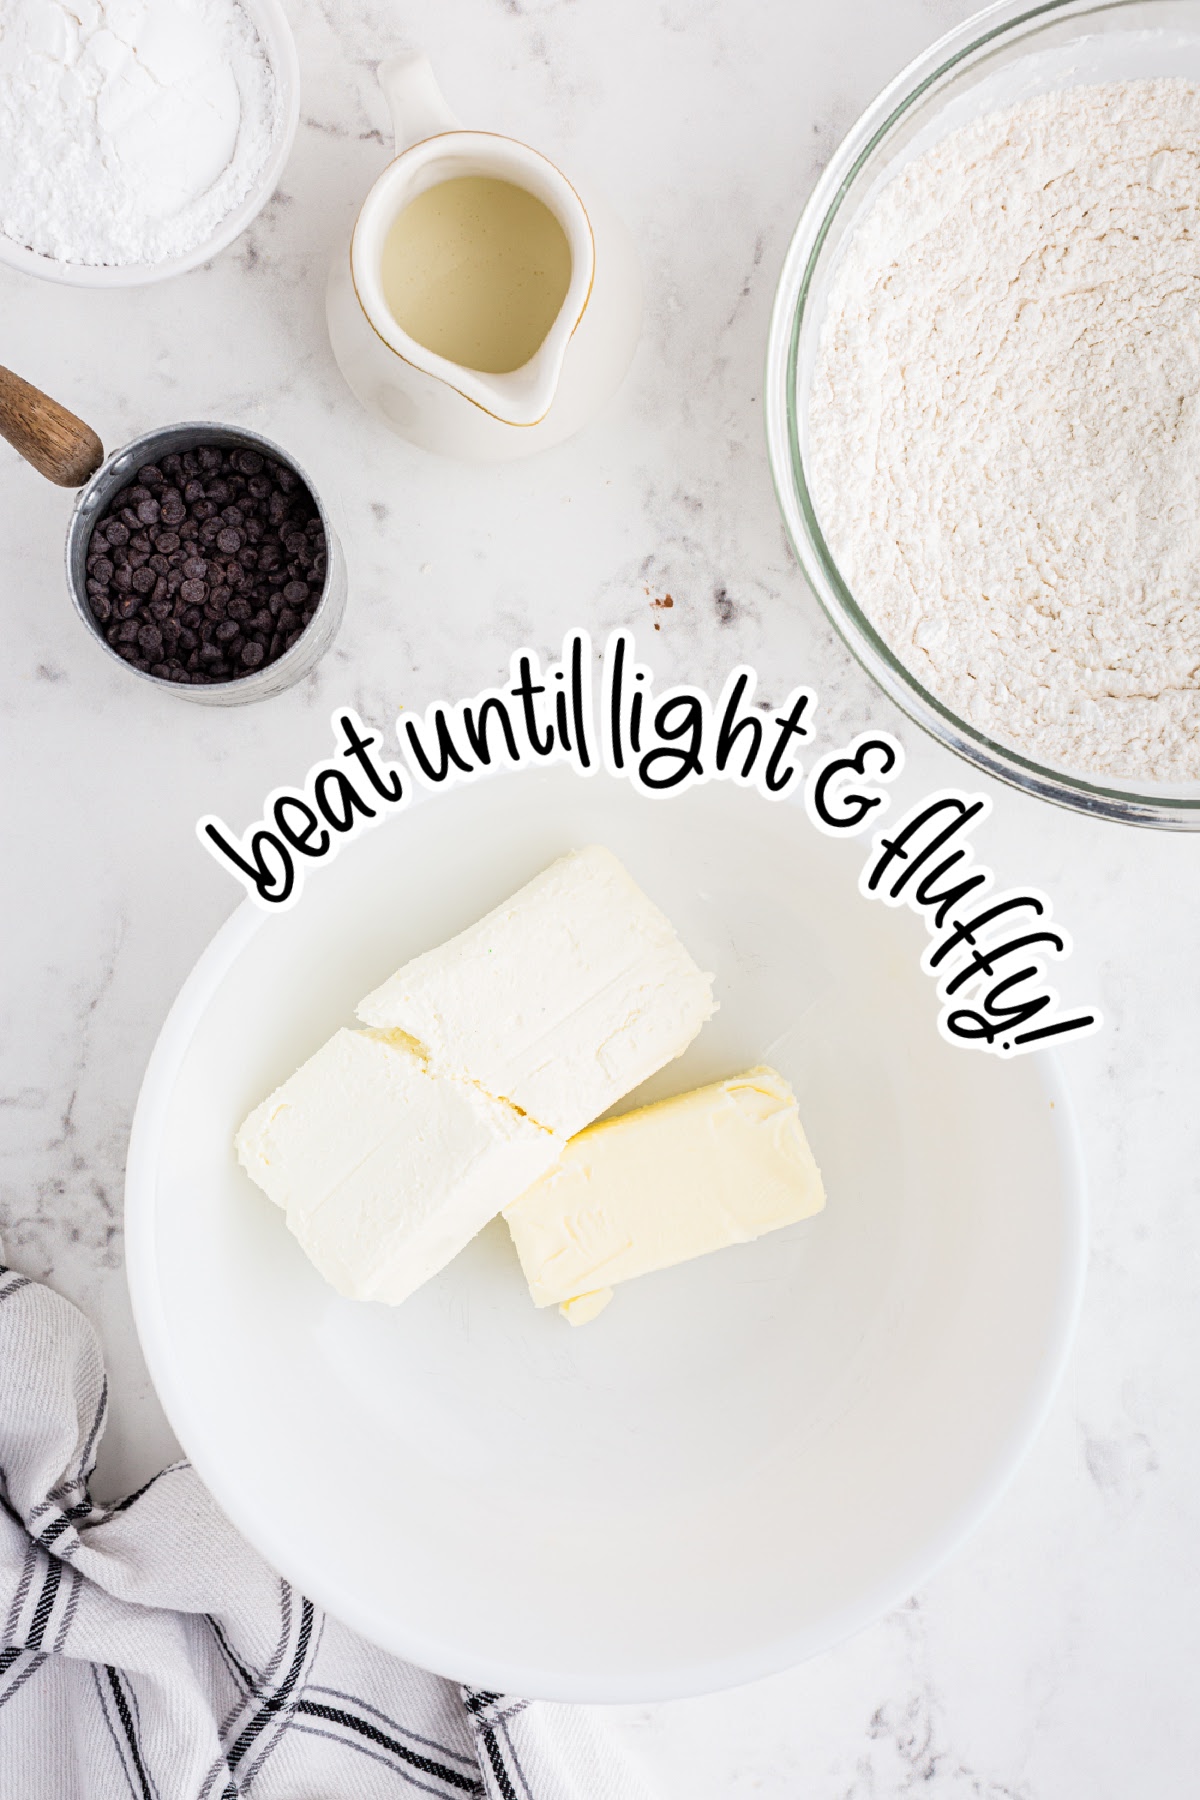 Cream cheese and butter in a mixing bowl with text "beat until light and fluffy."